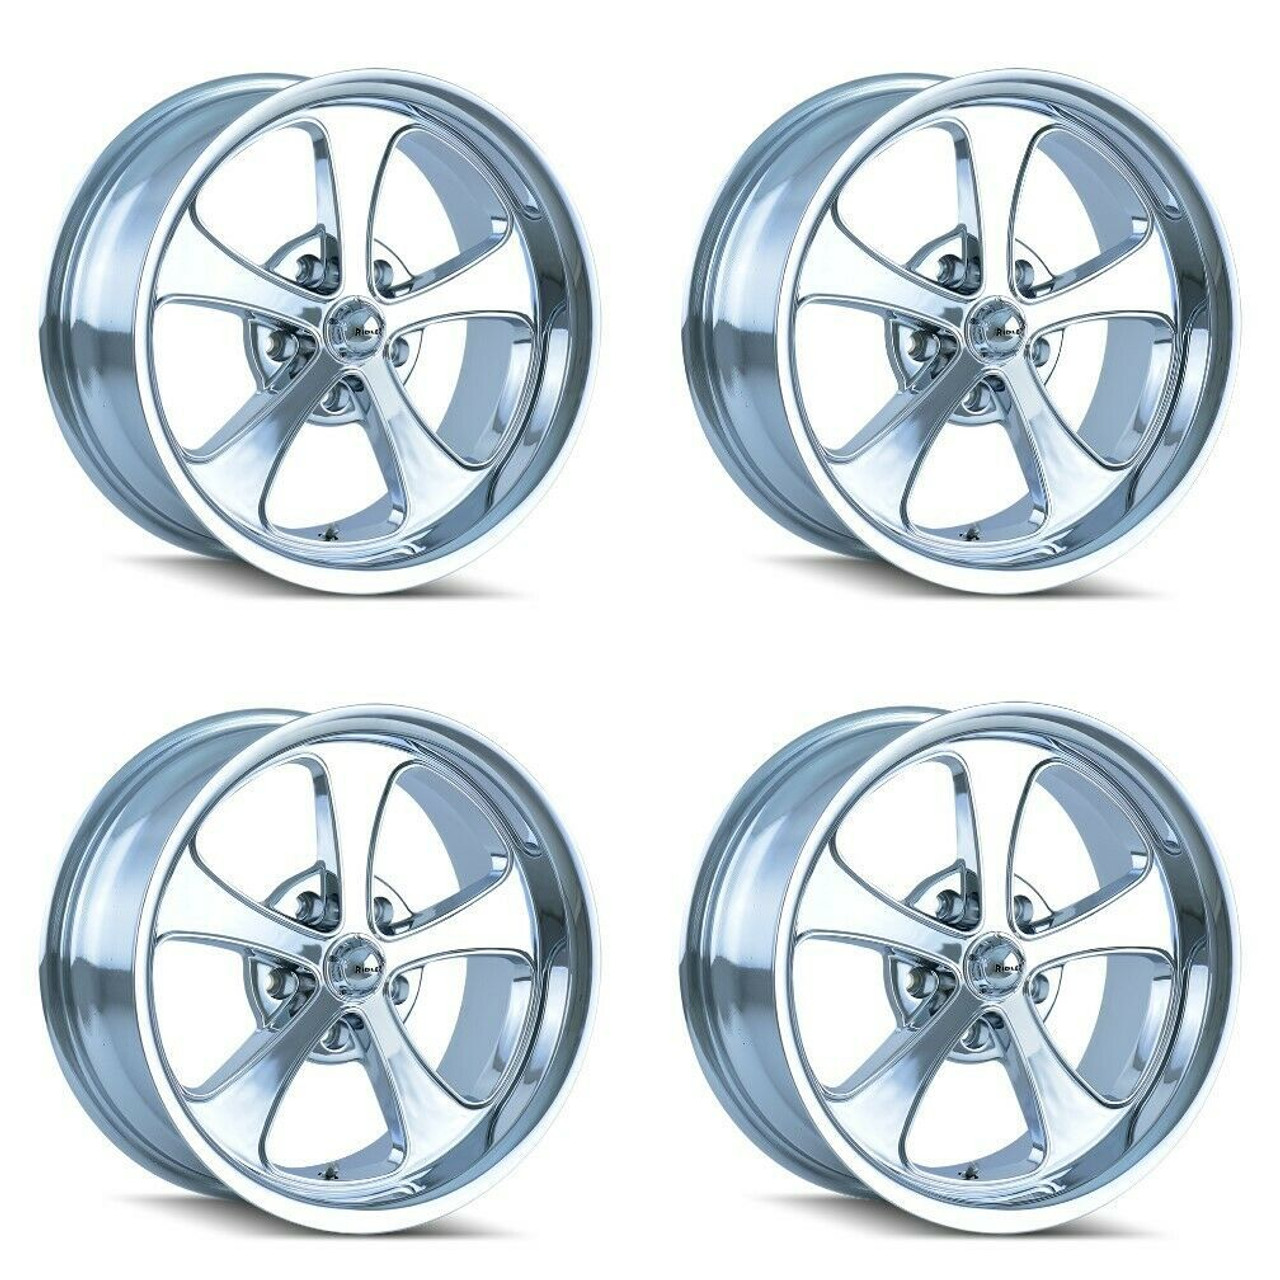 Set 4 20" Ridler 645 20x10 Chrome 5x4.5 Wheels 0mm Rims For Ford Jeep Truck